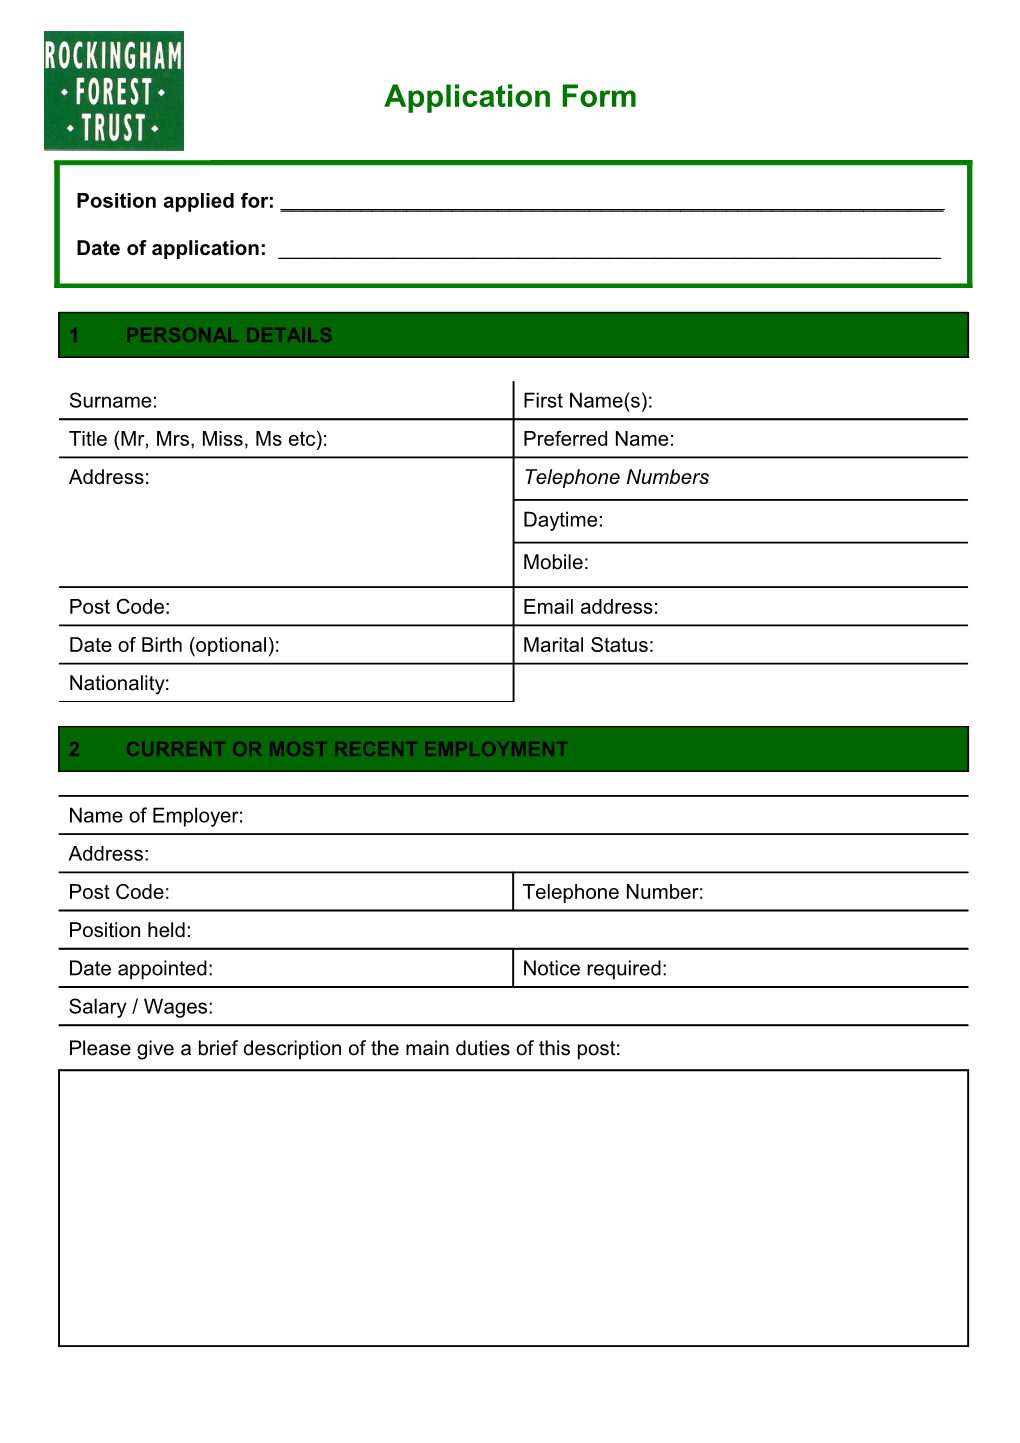 Application Form s16